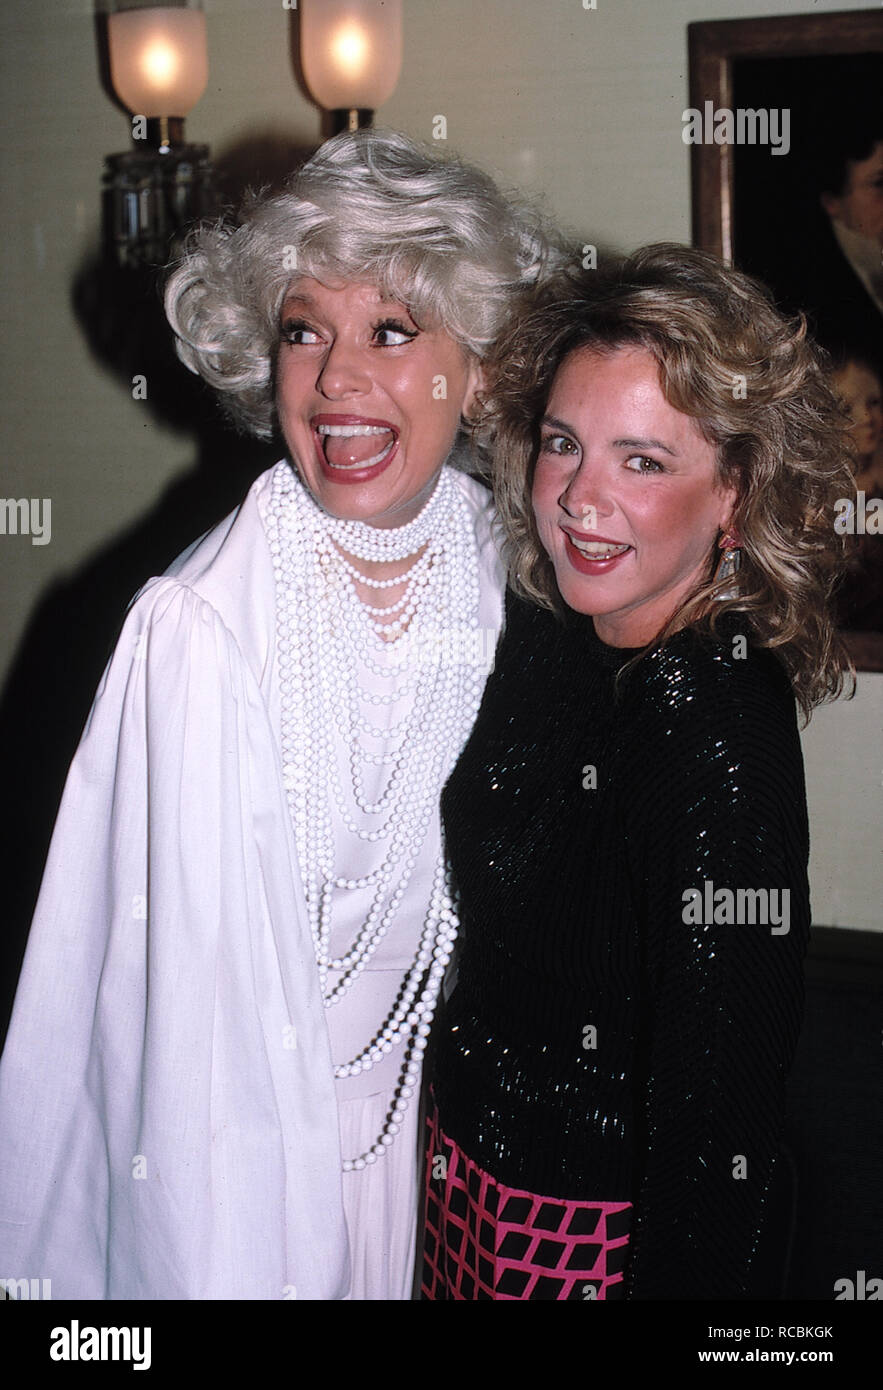 ***FILE PHOTO*** Carol Channing has passed away at 97 Carol Channing and Stockard Channing photographed on June 21, 1988 in New York City. Credit: Walter McBride/MediaPunch Stock Photo